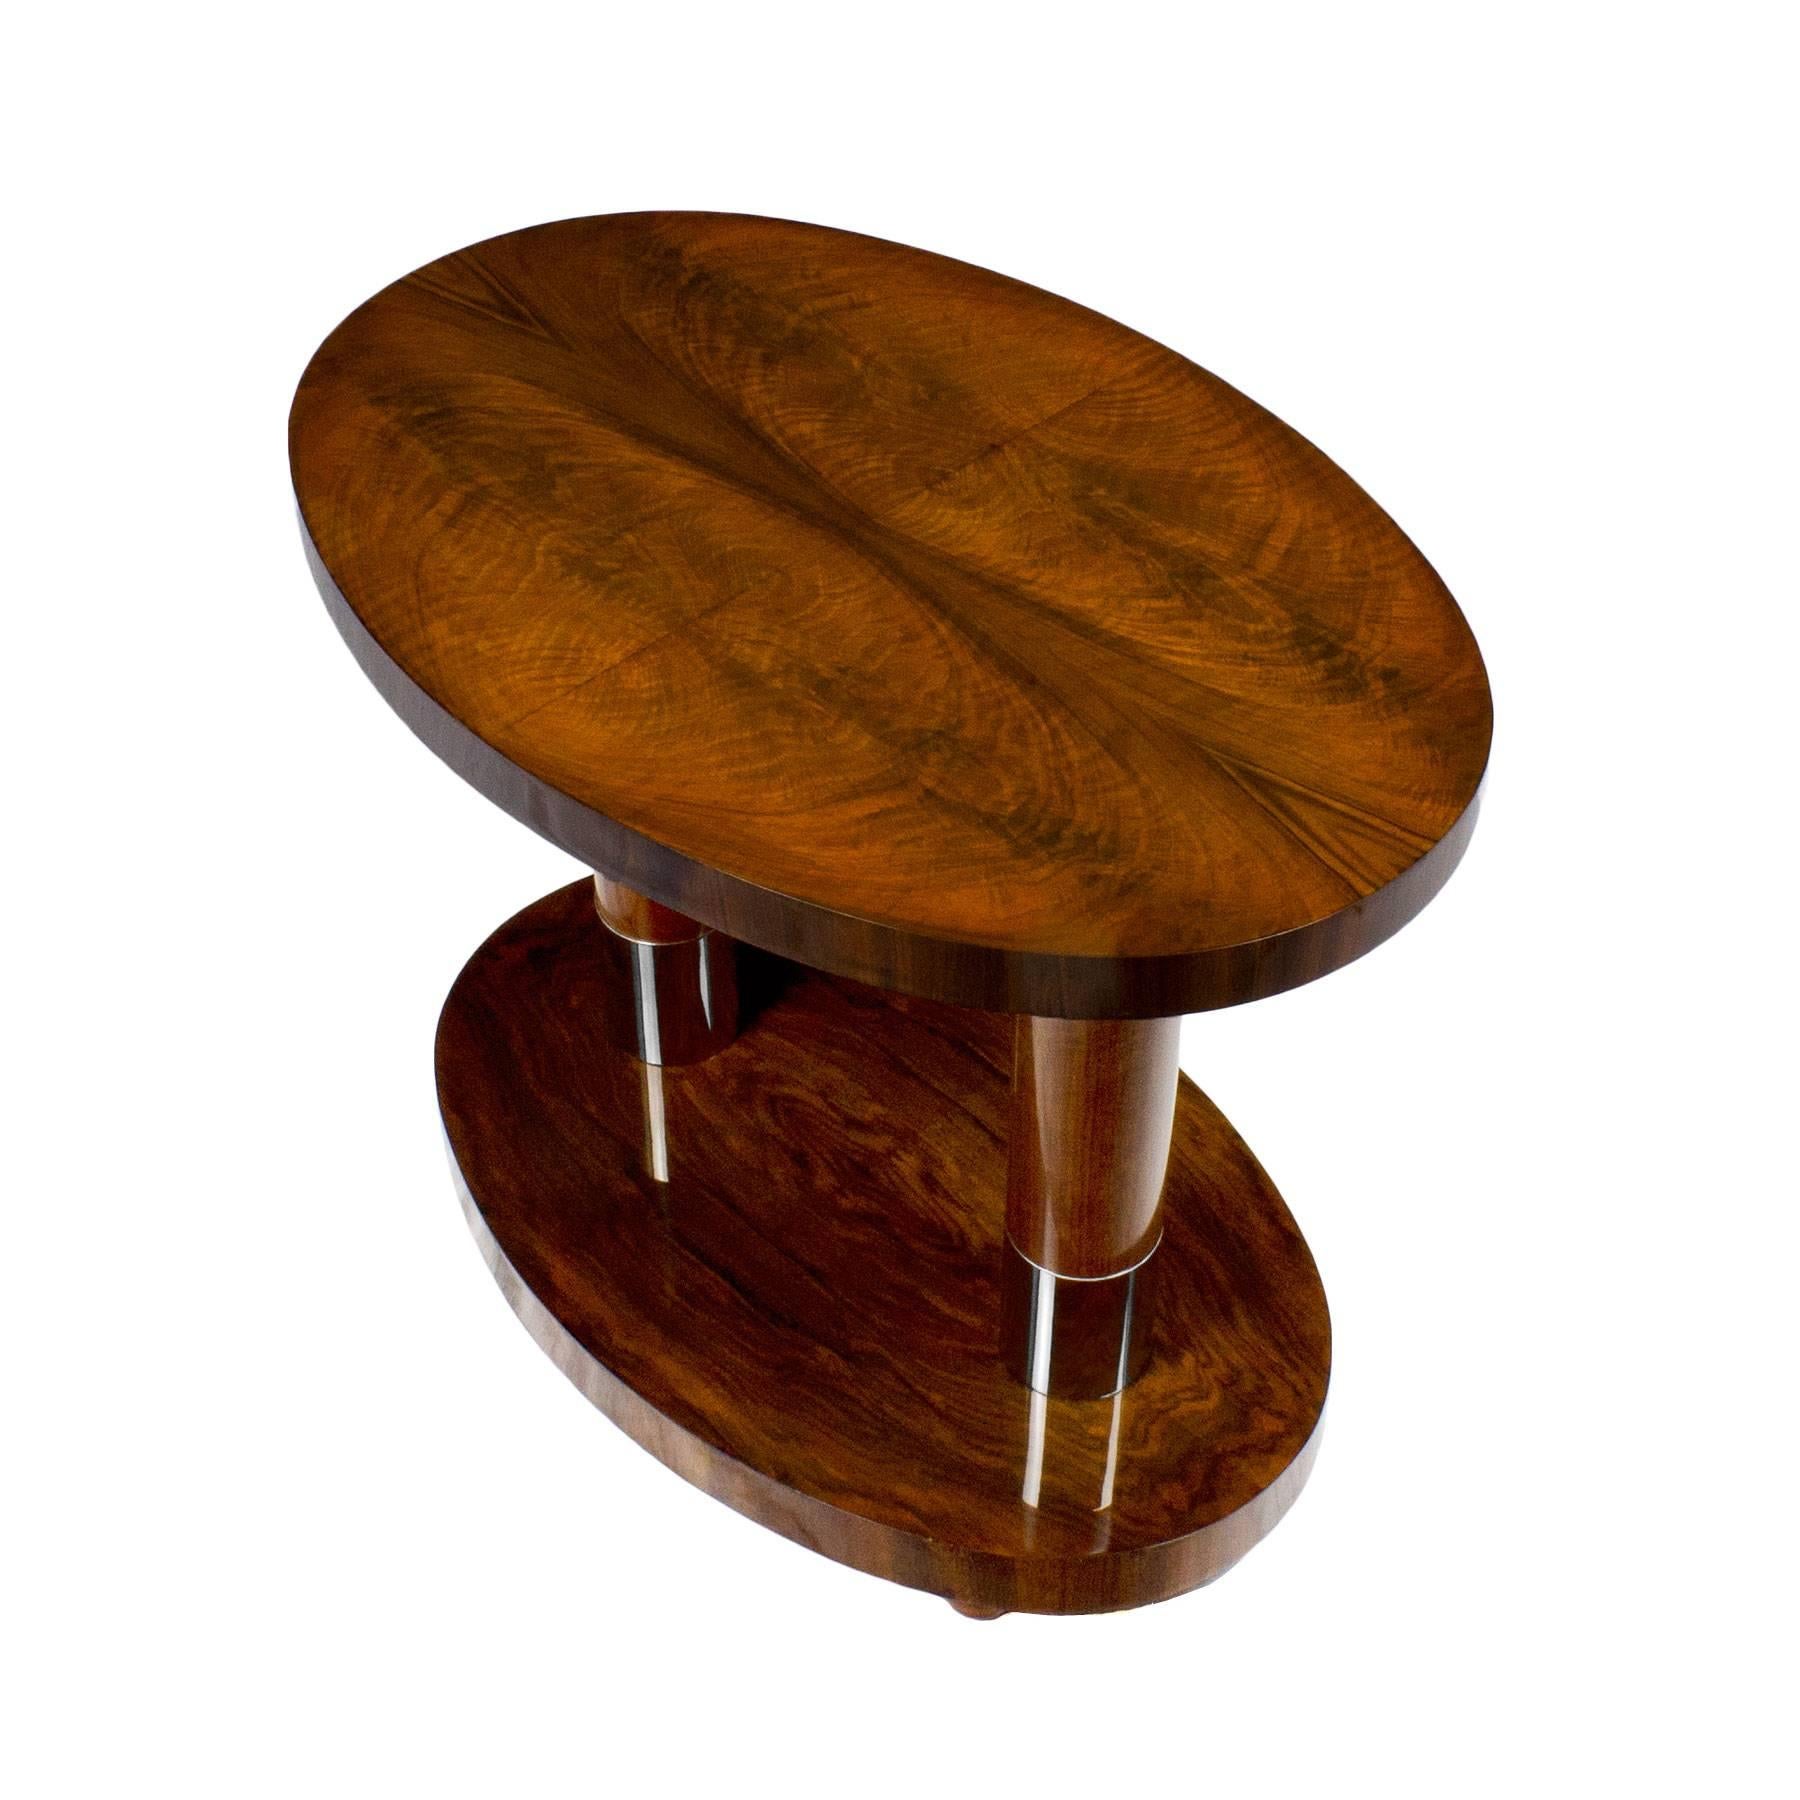 Italian 1940s Oval Side Table, Solid Walnut and Veneer, Nickel Plated Brass, France